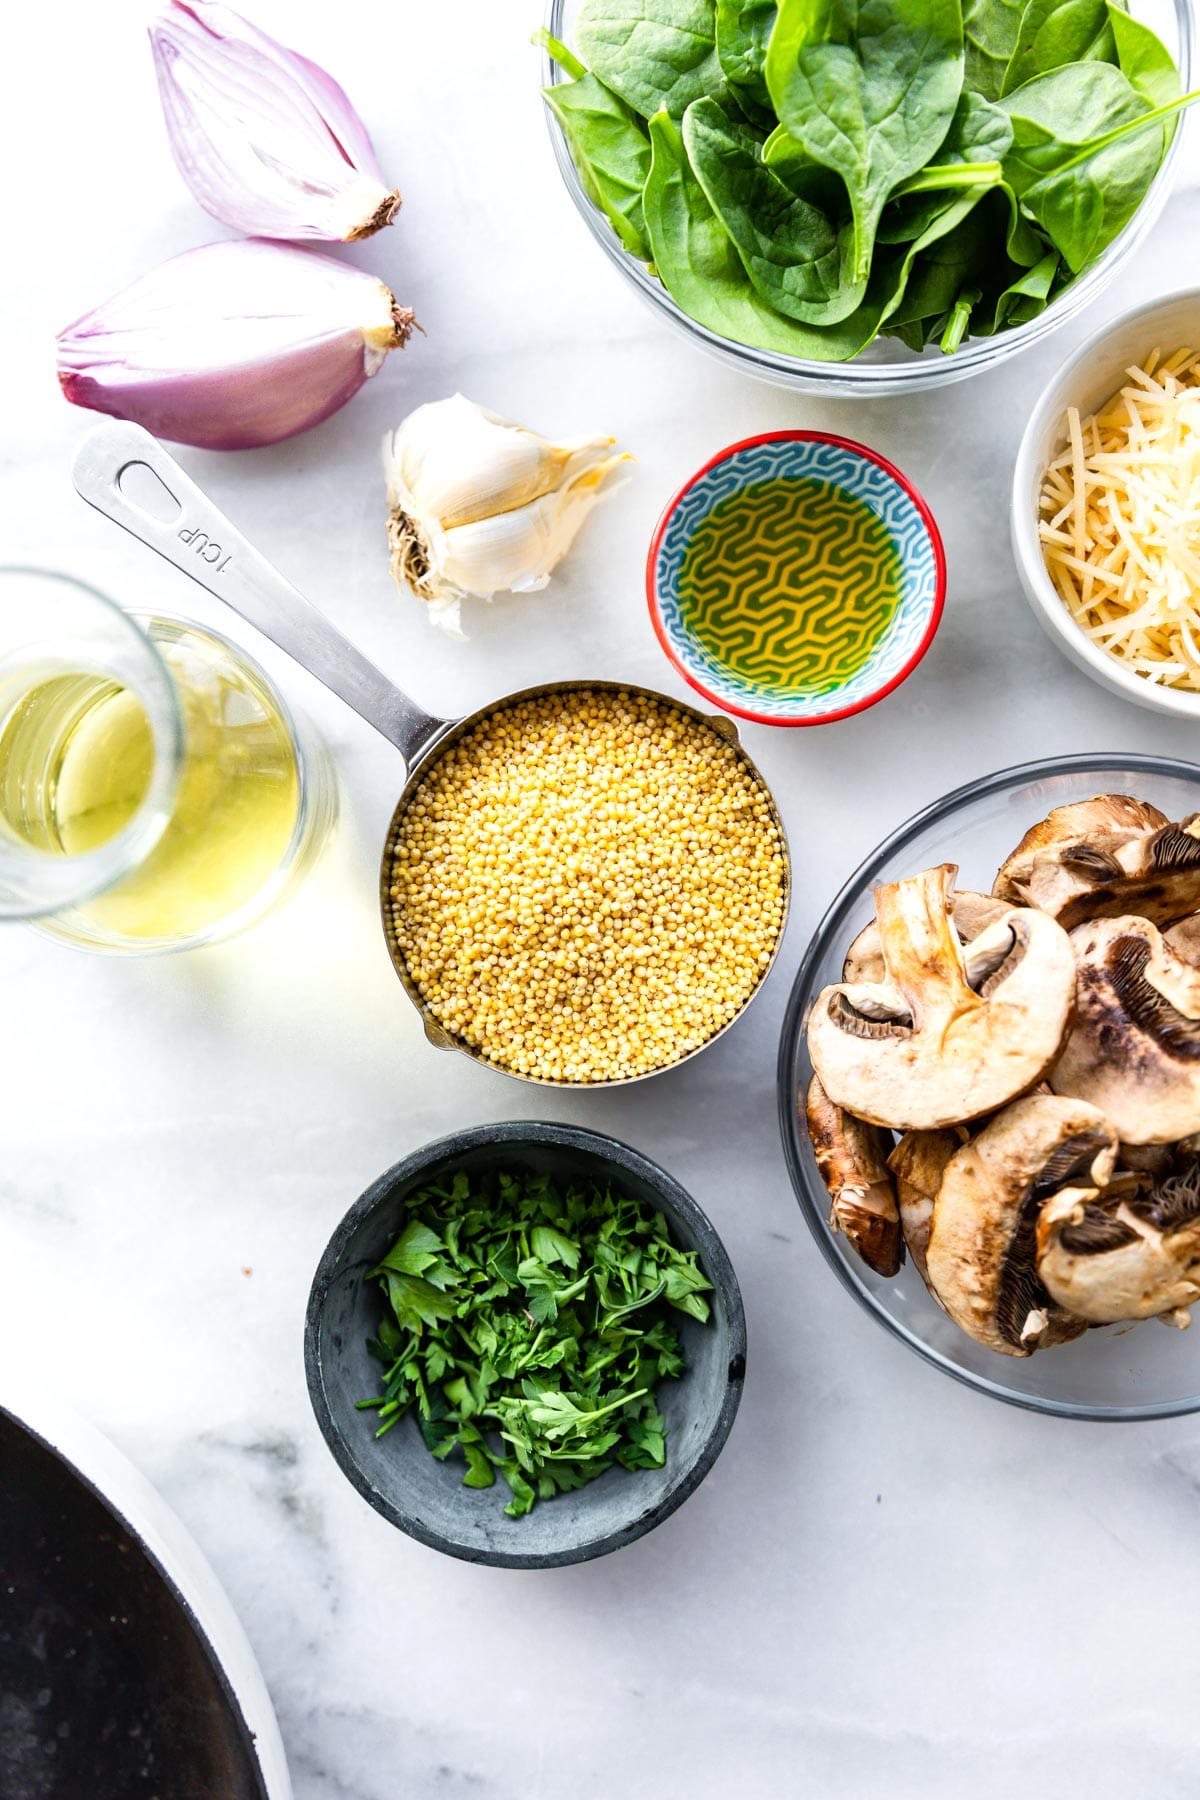 ingredients for Millet and Mushroom Risotto - see our gluten free grain mushroom risotto recipe! #millet #risotto #vegan #mushroomrisotto